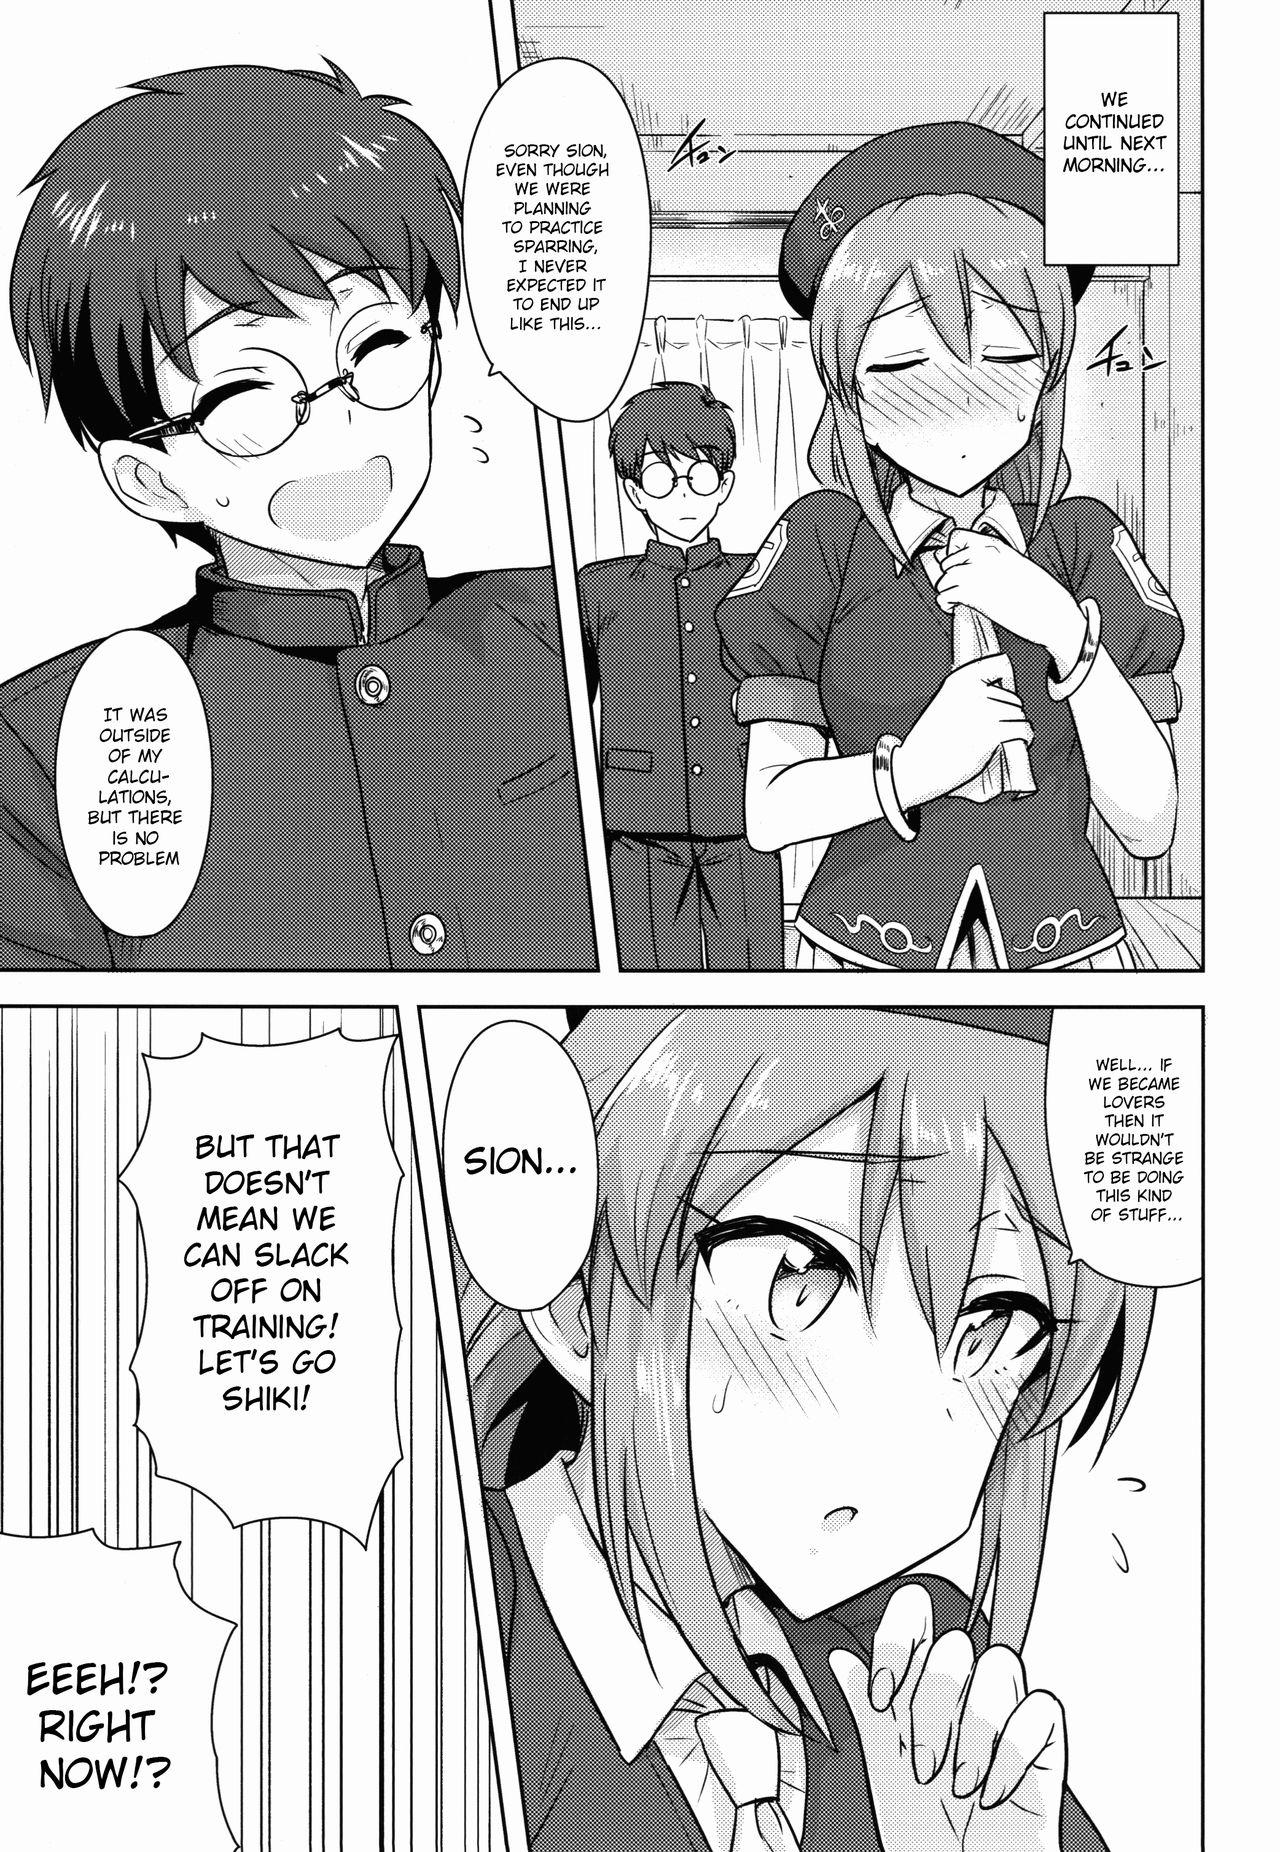 Blonde Aru Hi no Futari MelBlo Hen | A Certain Day with Each Other Melty Blood Hen - Tsukihime Homemade - Page 8